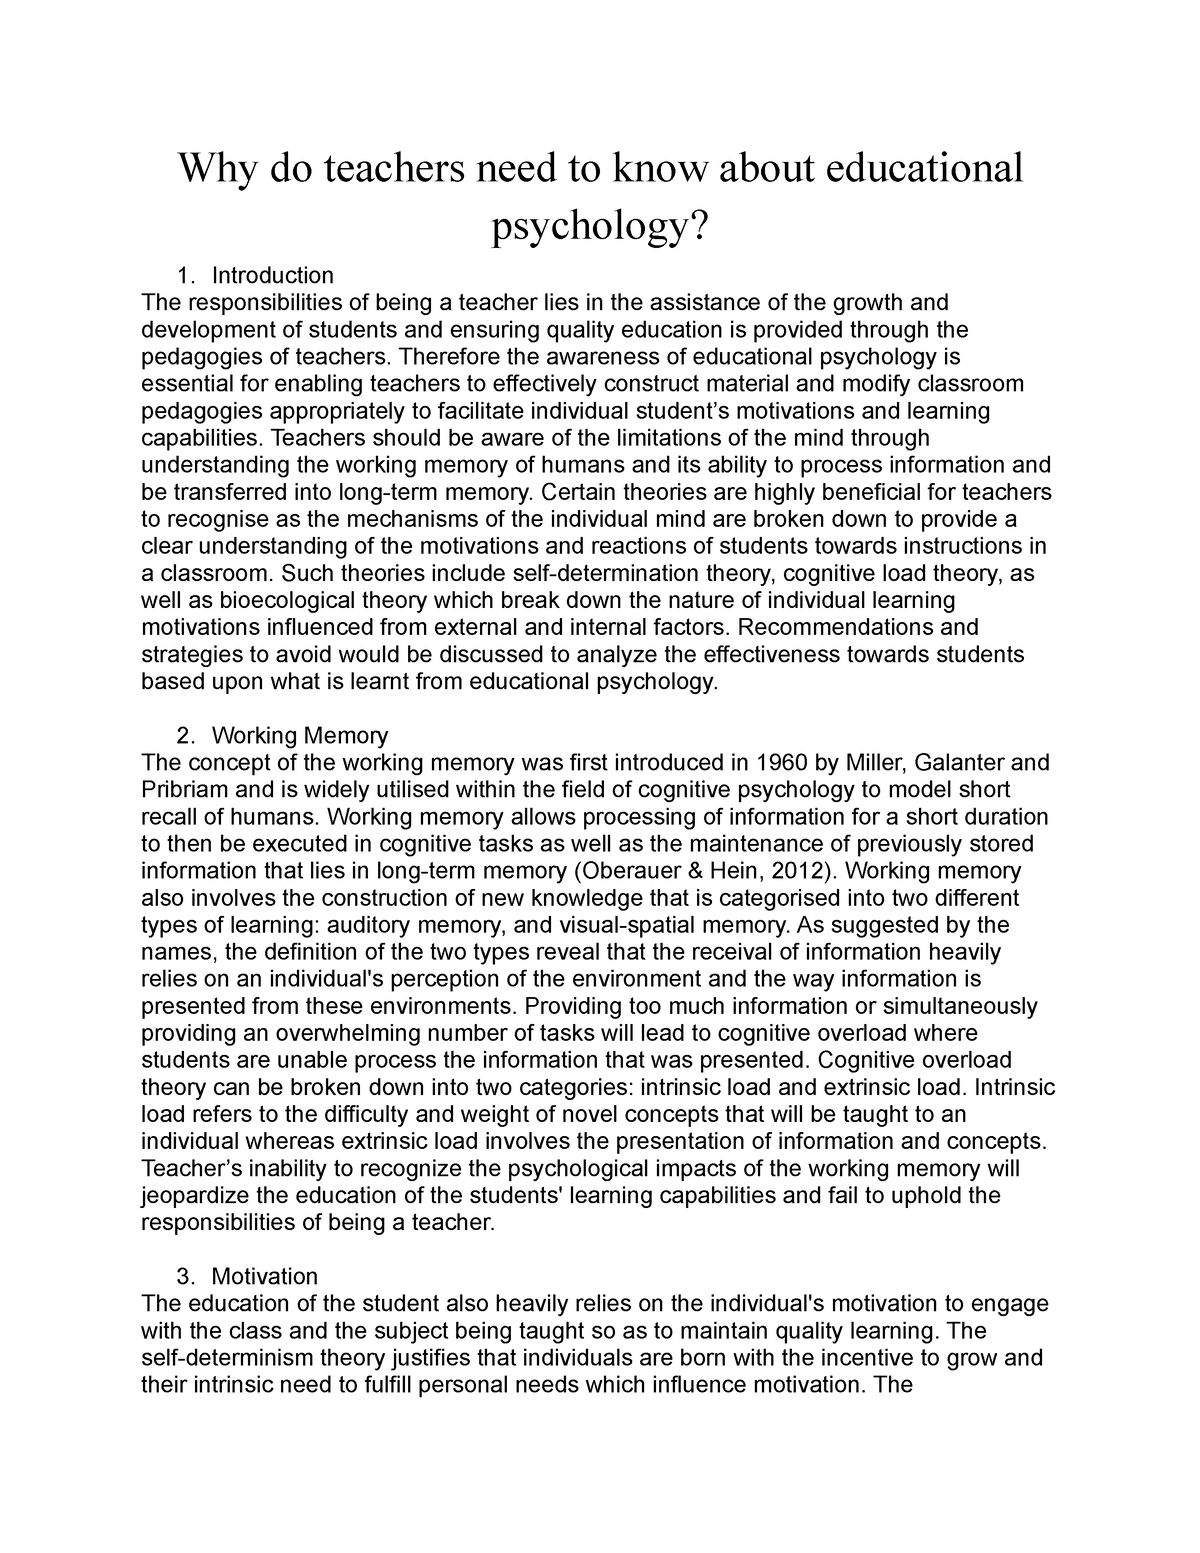 write an essay about educational psychology